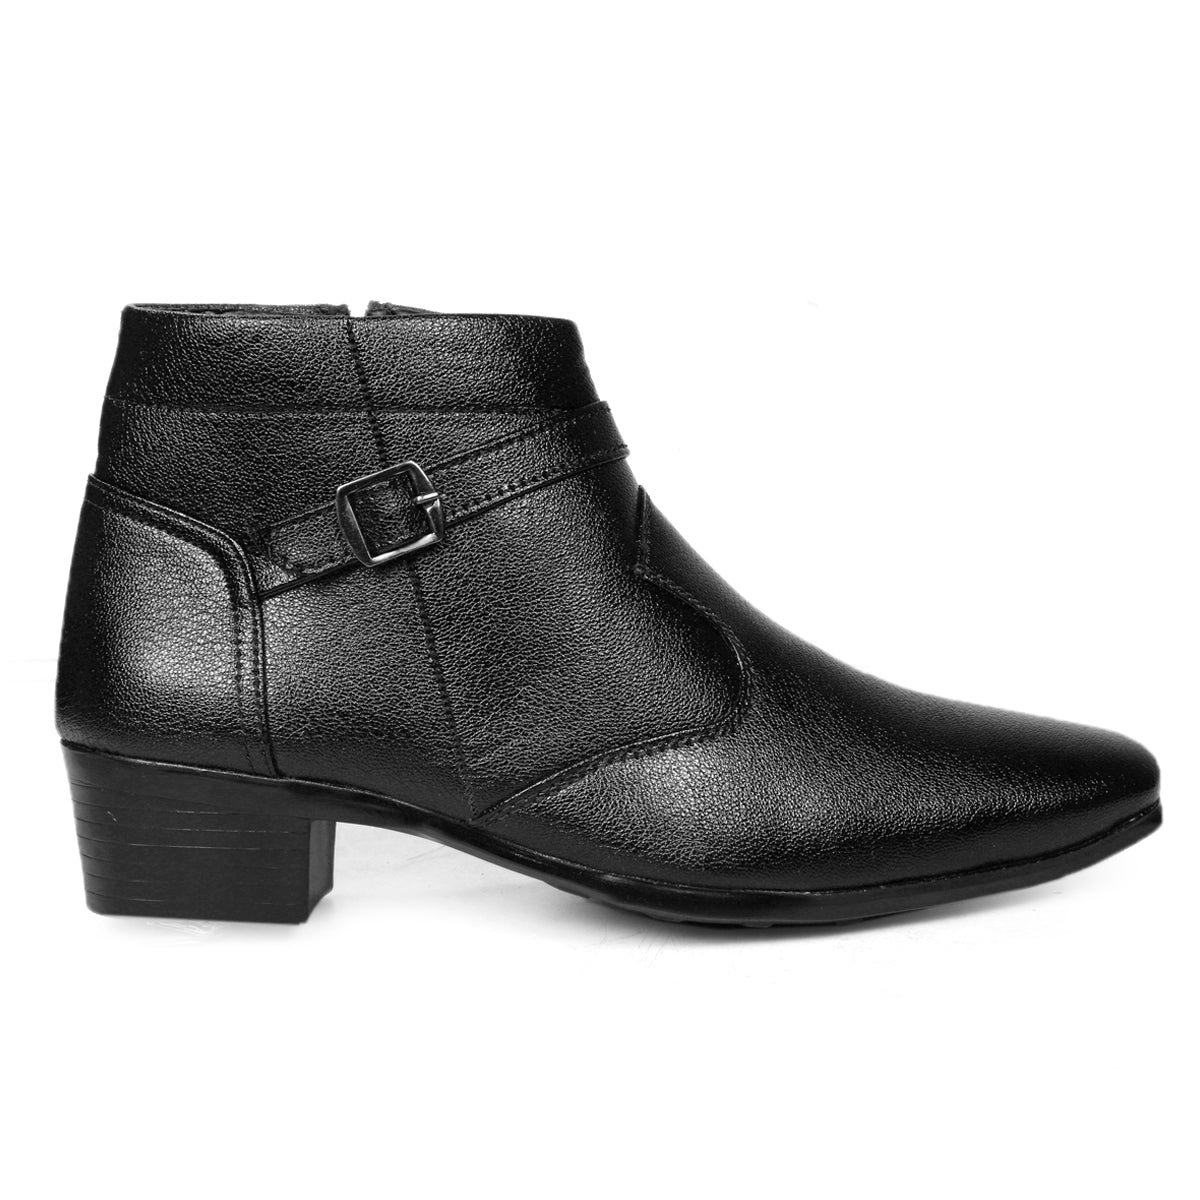 BXXY Height Increasing Ankle Zipper Boots For Men